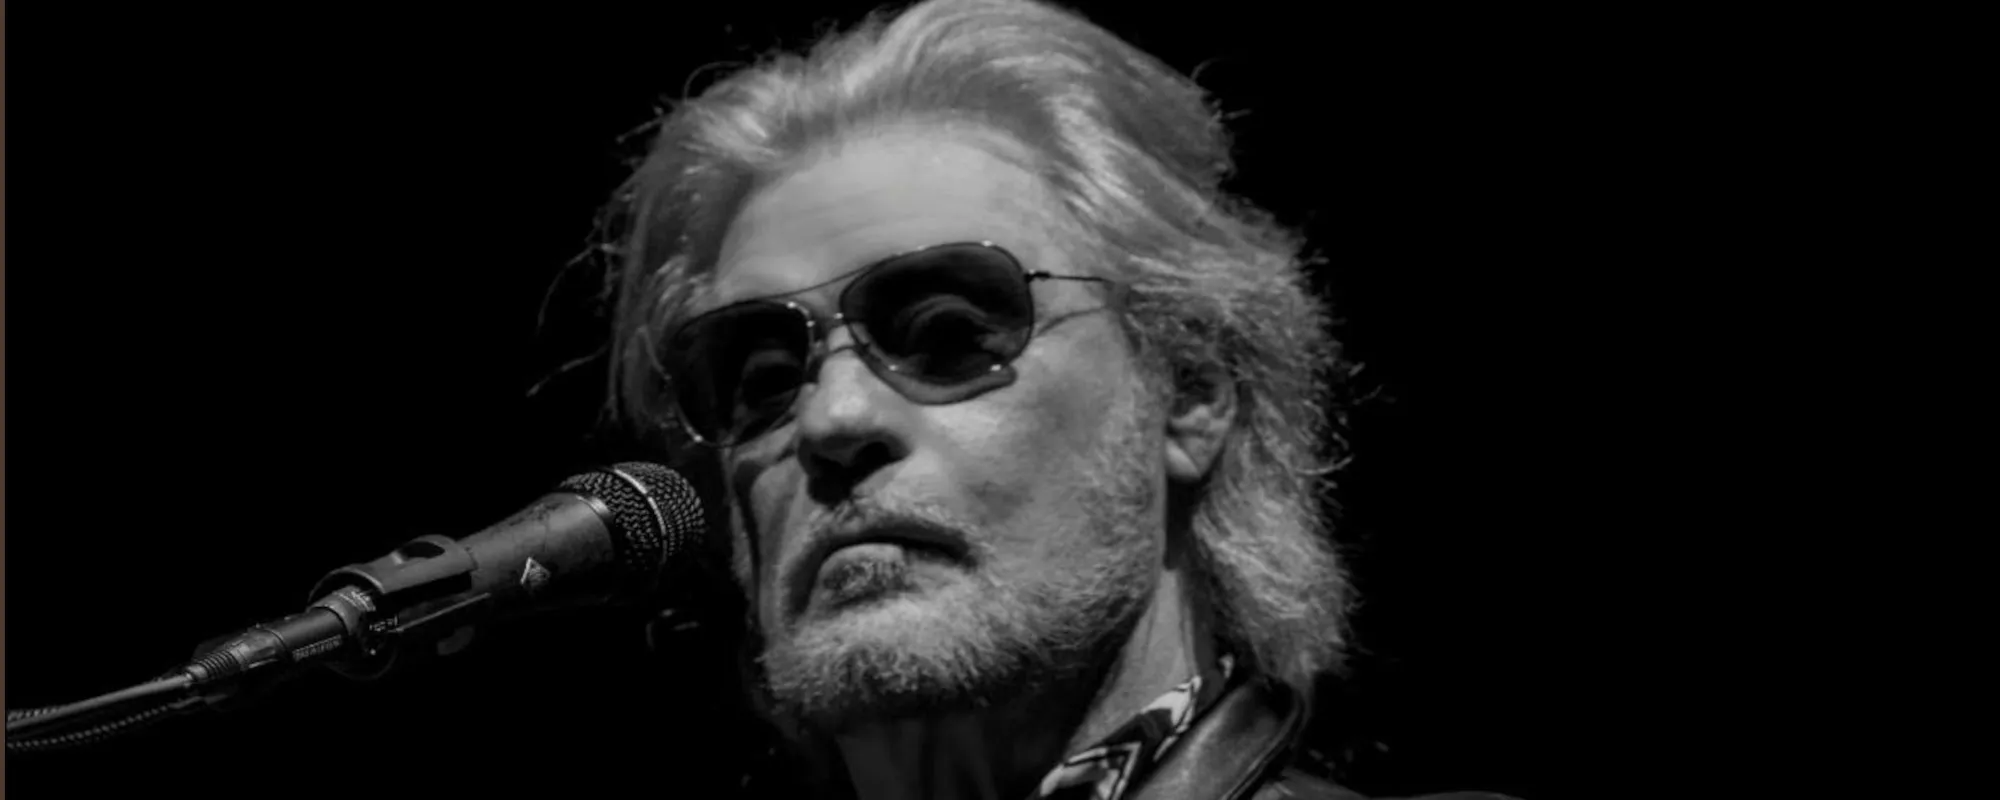 Review: ‘BeforeAfter’ Recaps Daryl Hall’s Solo Career with a Double Disc Dose of Live and Studio Highlights